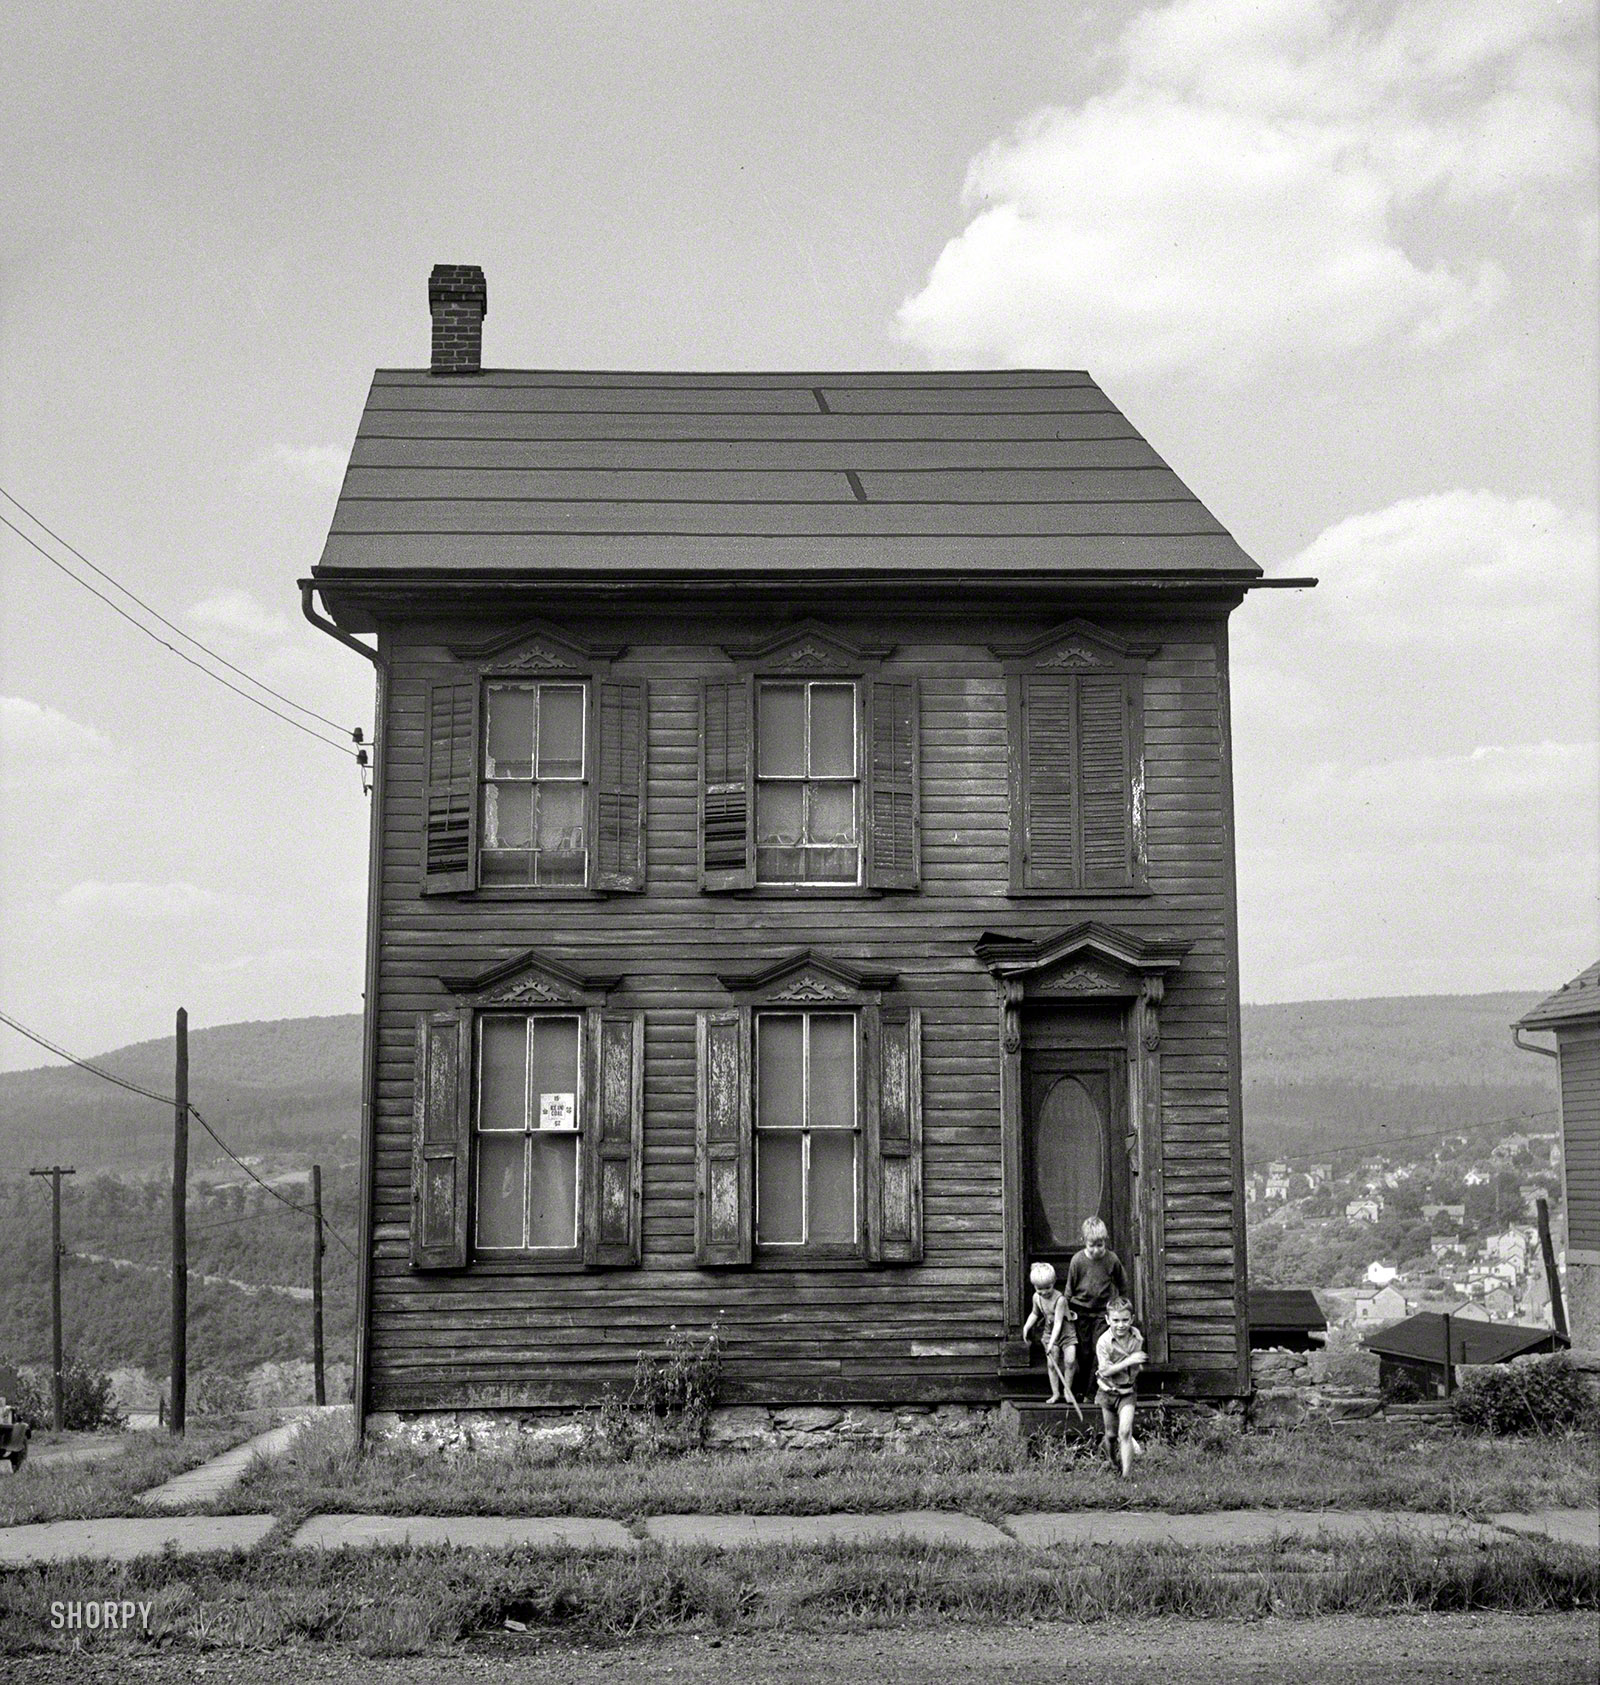 August 1940. "Old house in Upper Mauch Chunk, Pennsylvania. In the background is East Mauch Chunk." Photo by Jack Delano. View full size.